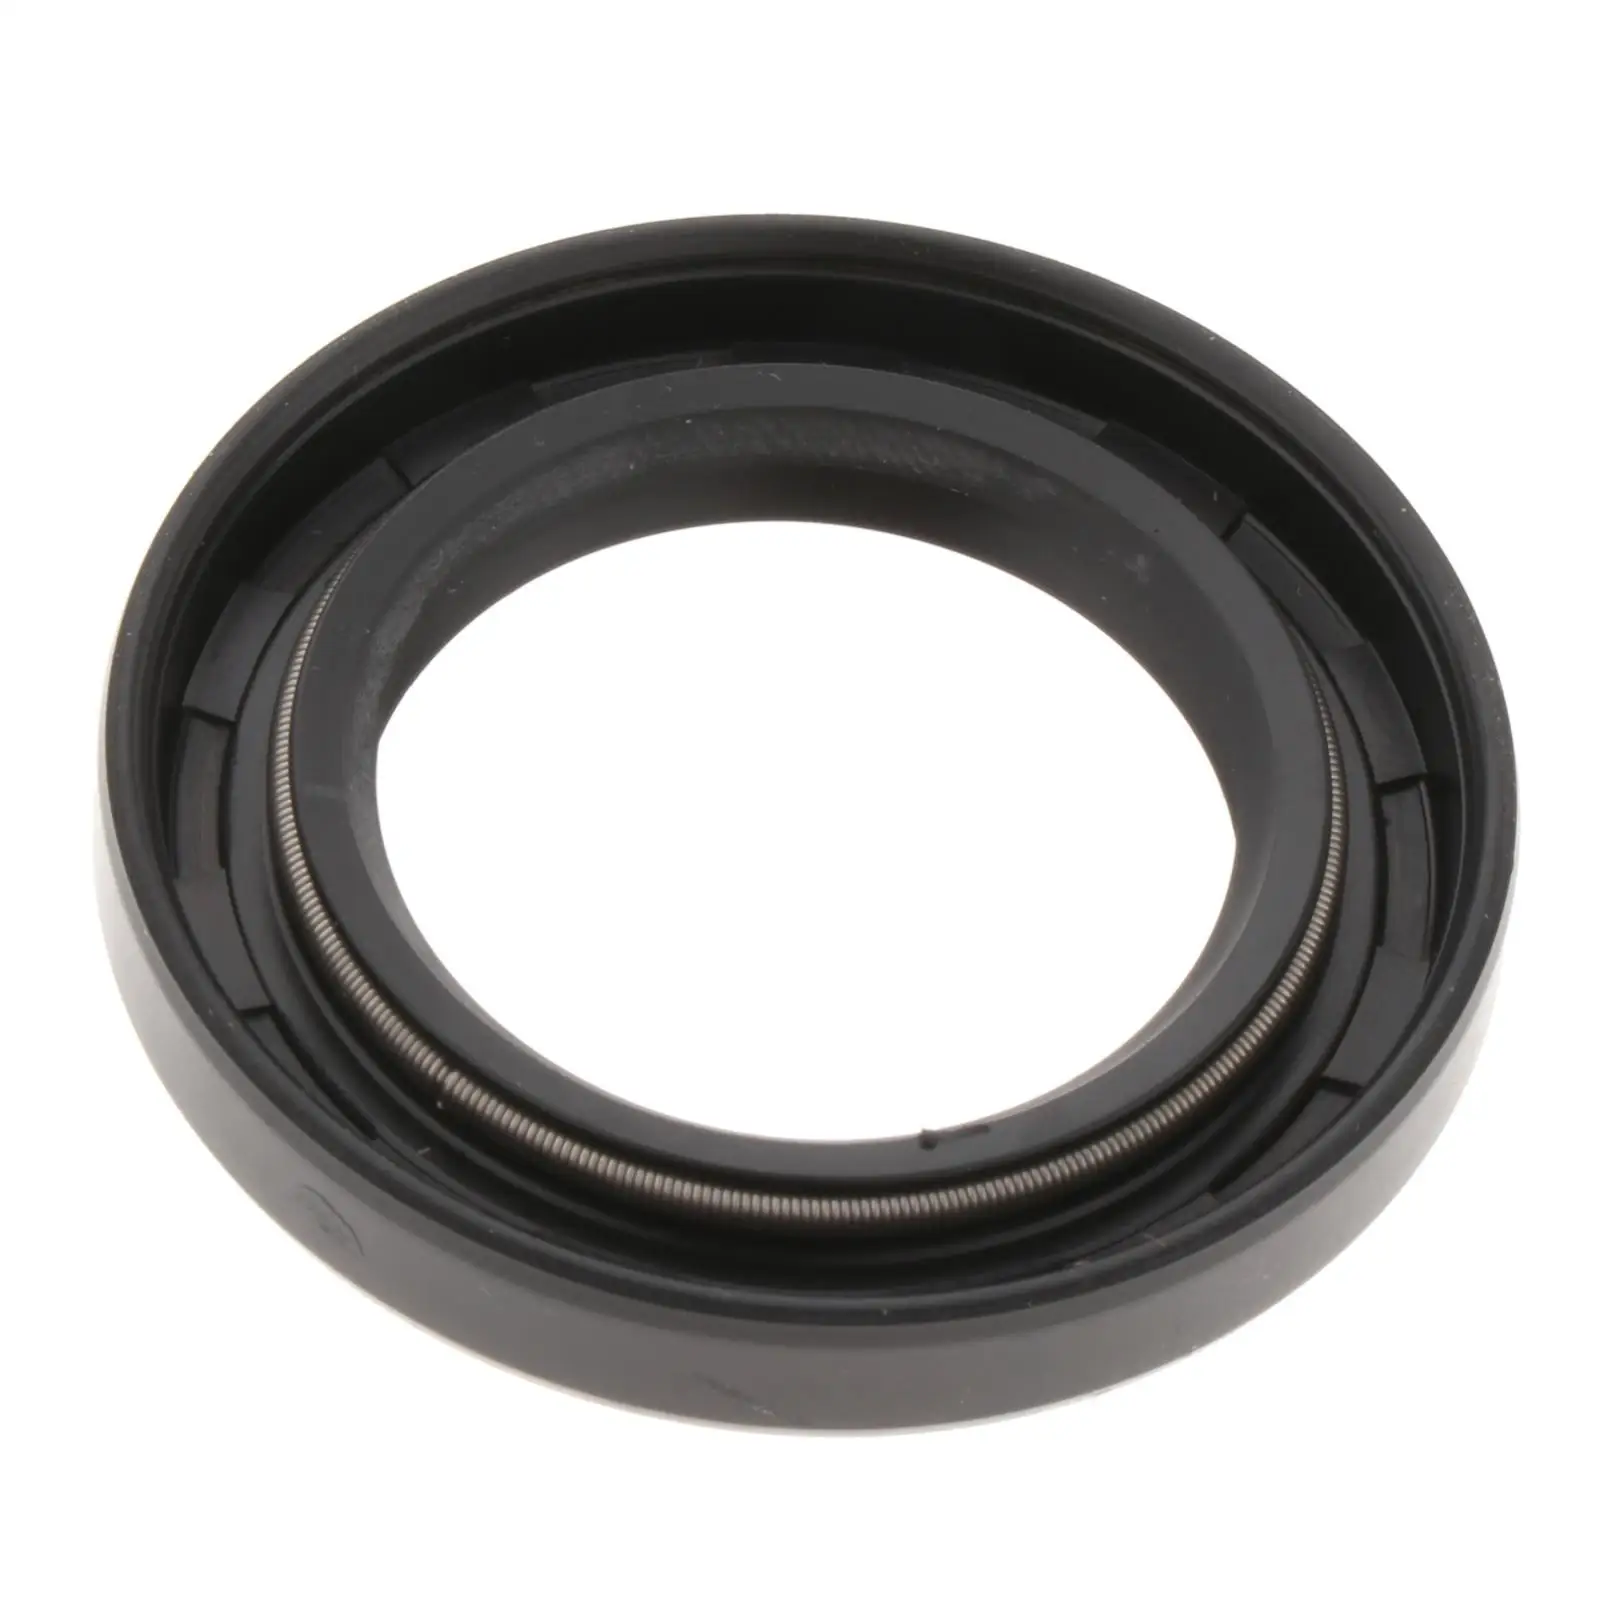 Oil Seal Fit for Yamaha Outboard Motor 2T 60HP-90HP Premium Direct Replaces